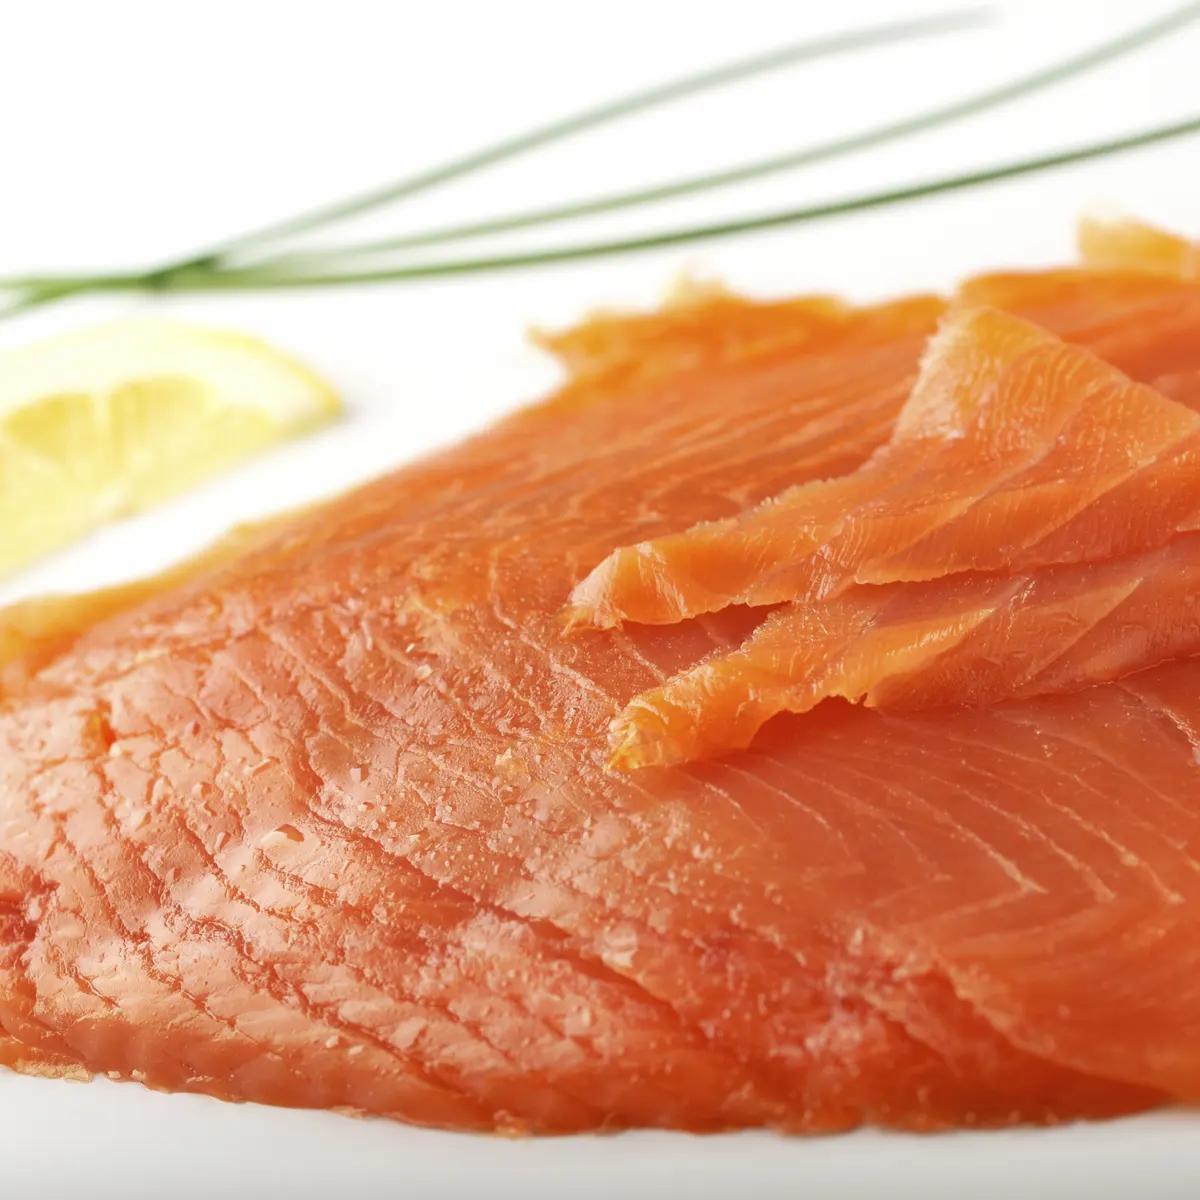 what does smoked salmon taste like - Does smoked salmon have a fishy taste